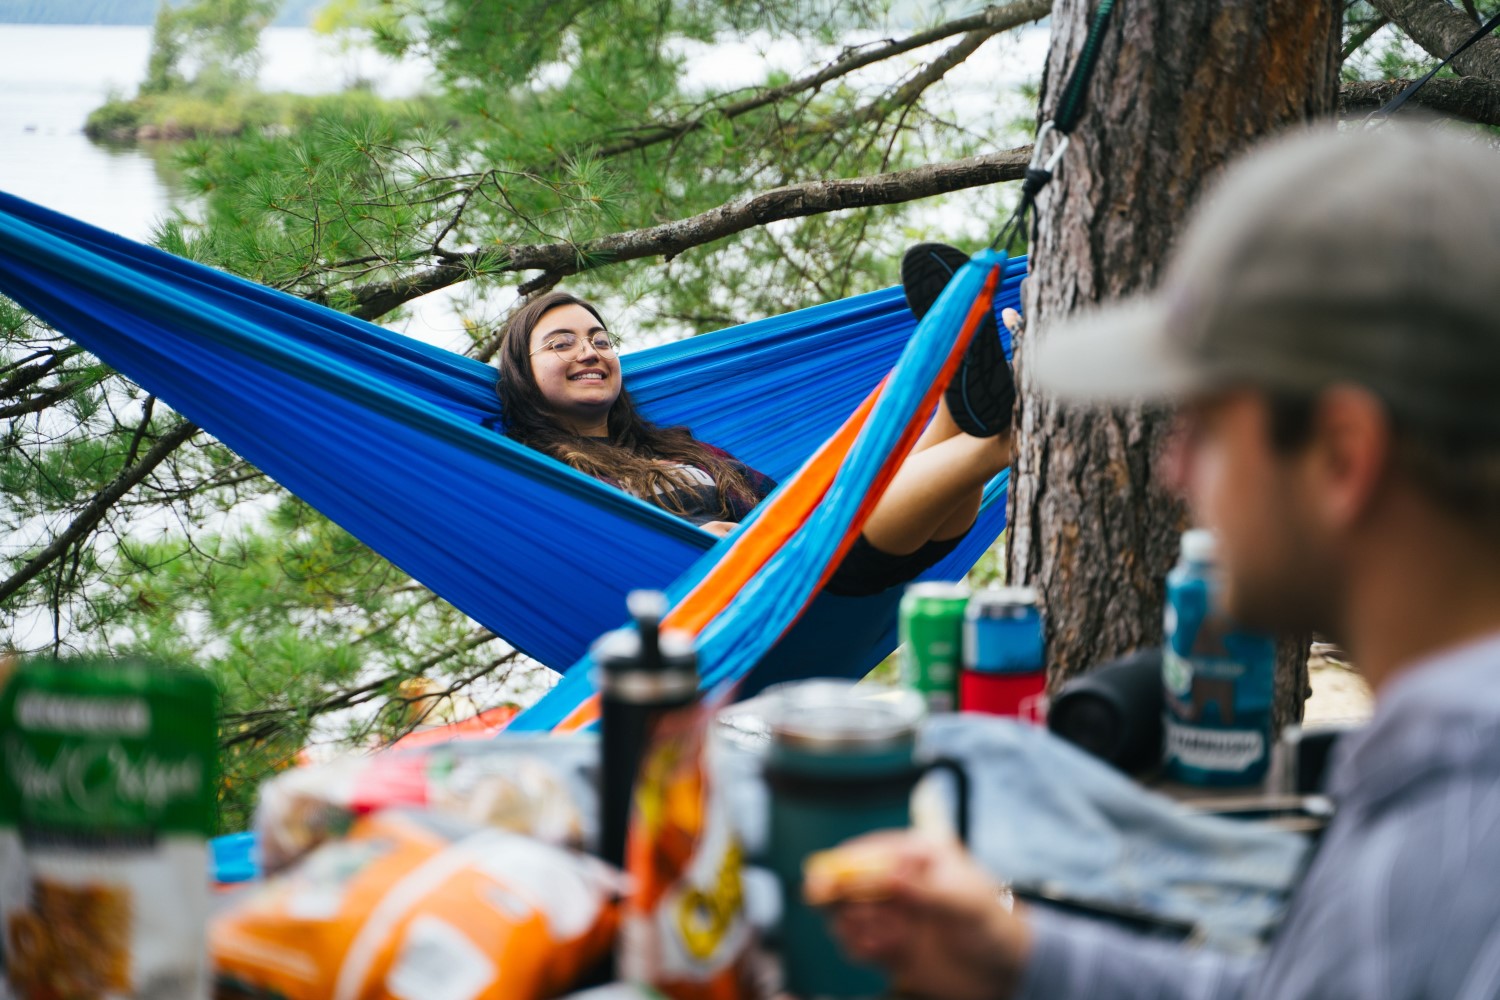 A person lying in a hammock, smiling at their camping companion who is sitting at the picnic table in the foreground.